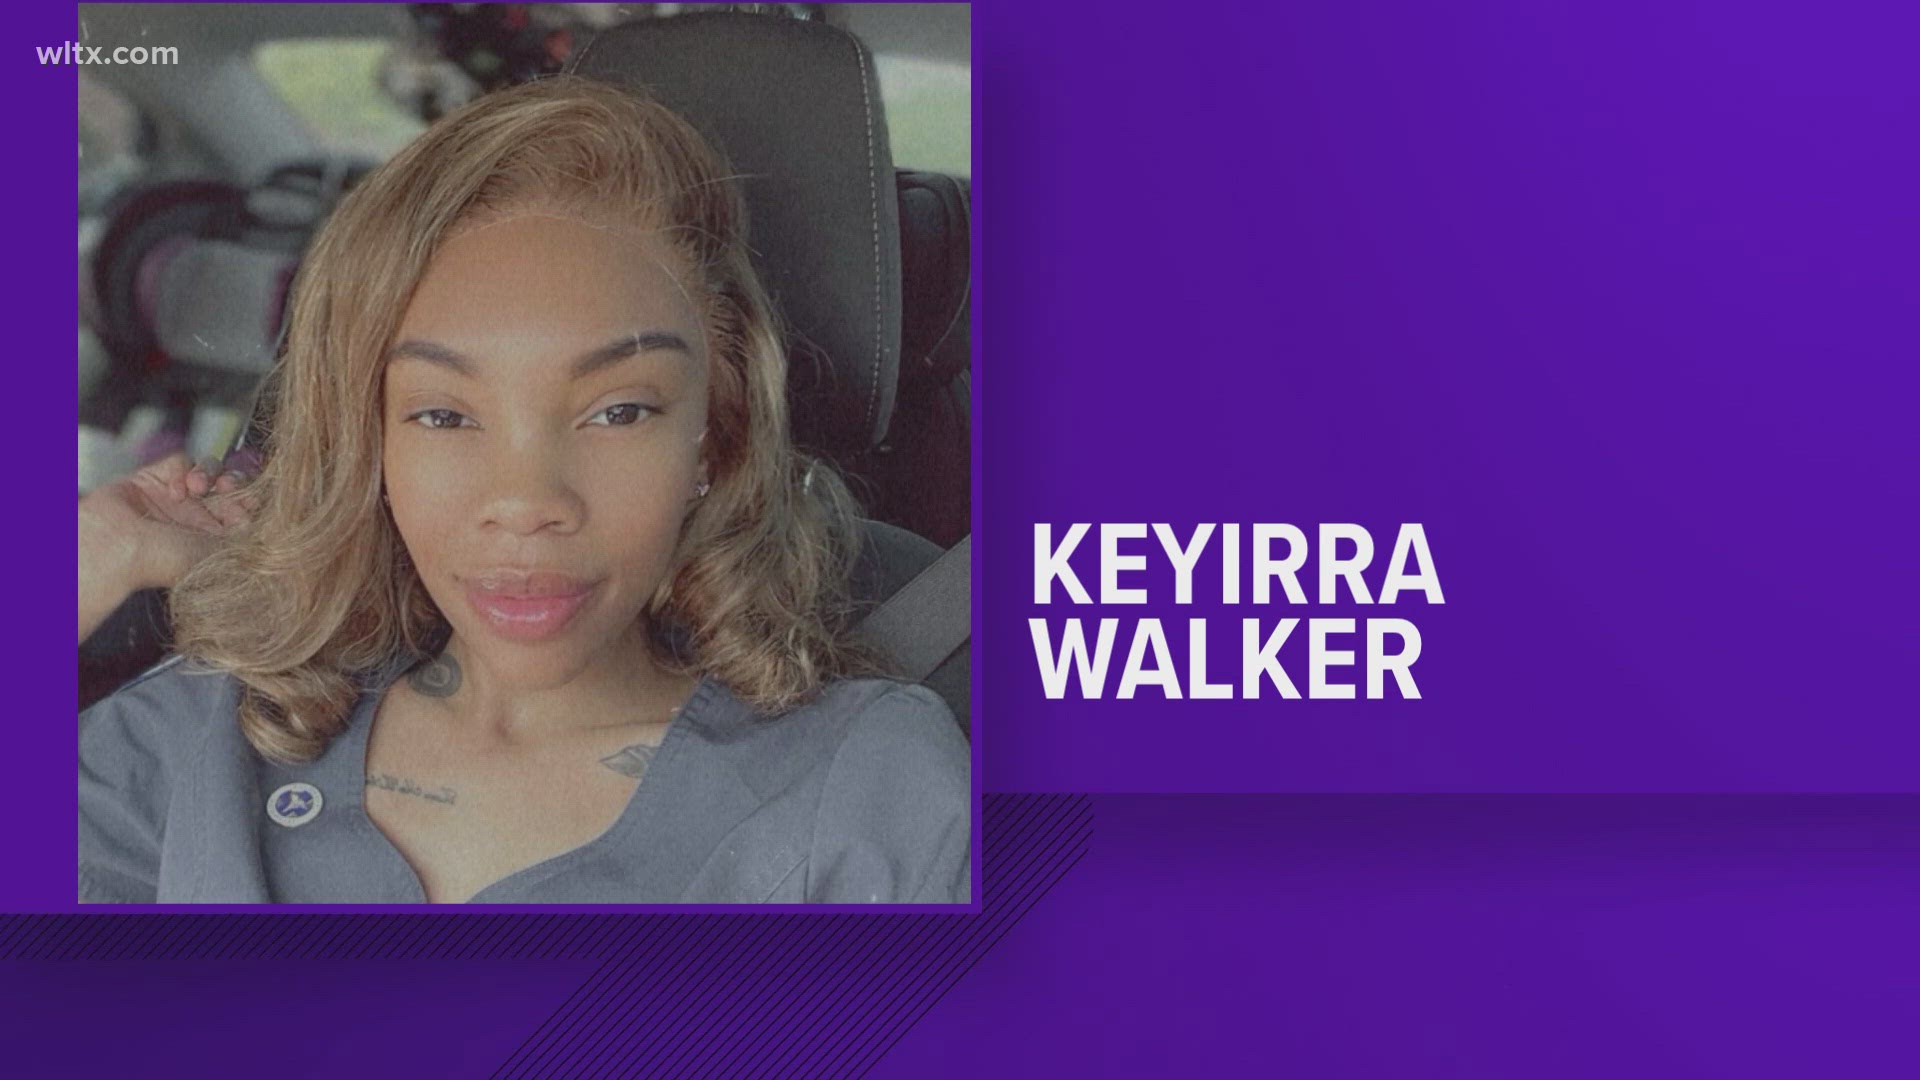 Keyirra Wlaker, 25, was found shot and killed in her home, she was 5months pregnant.